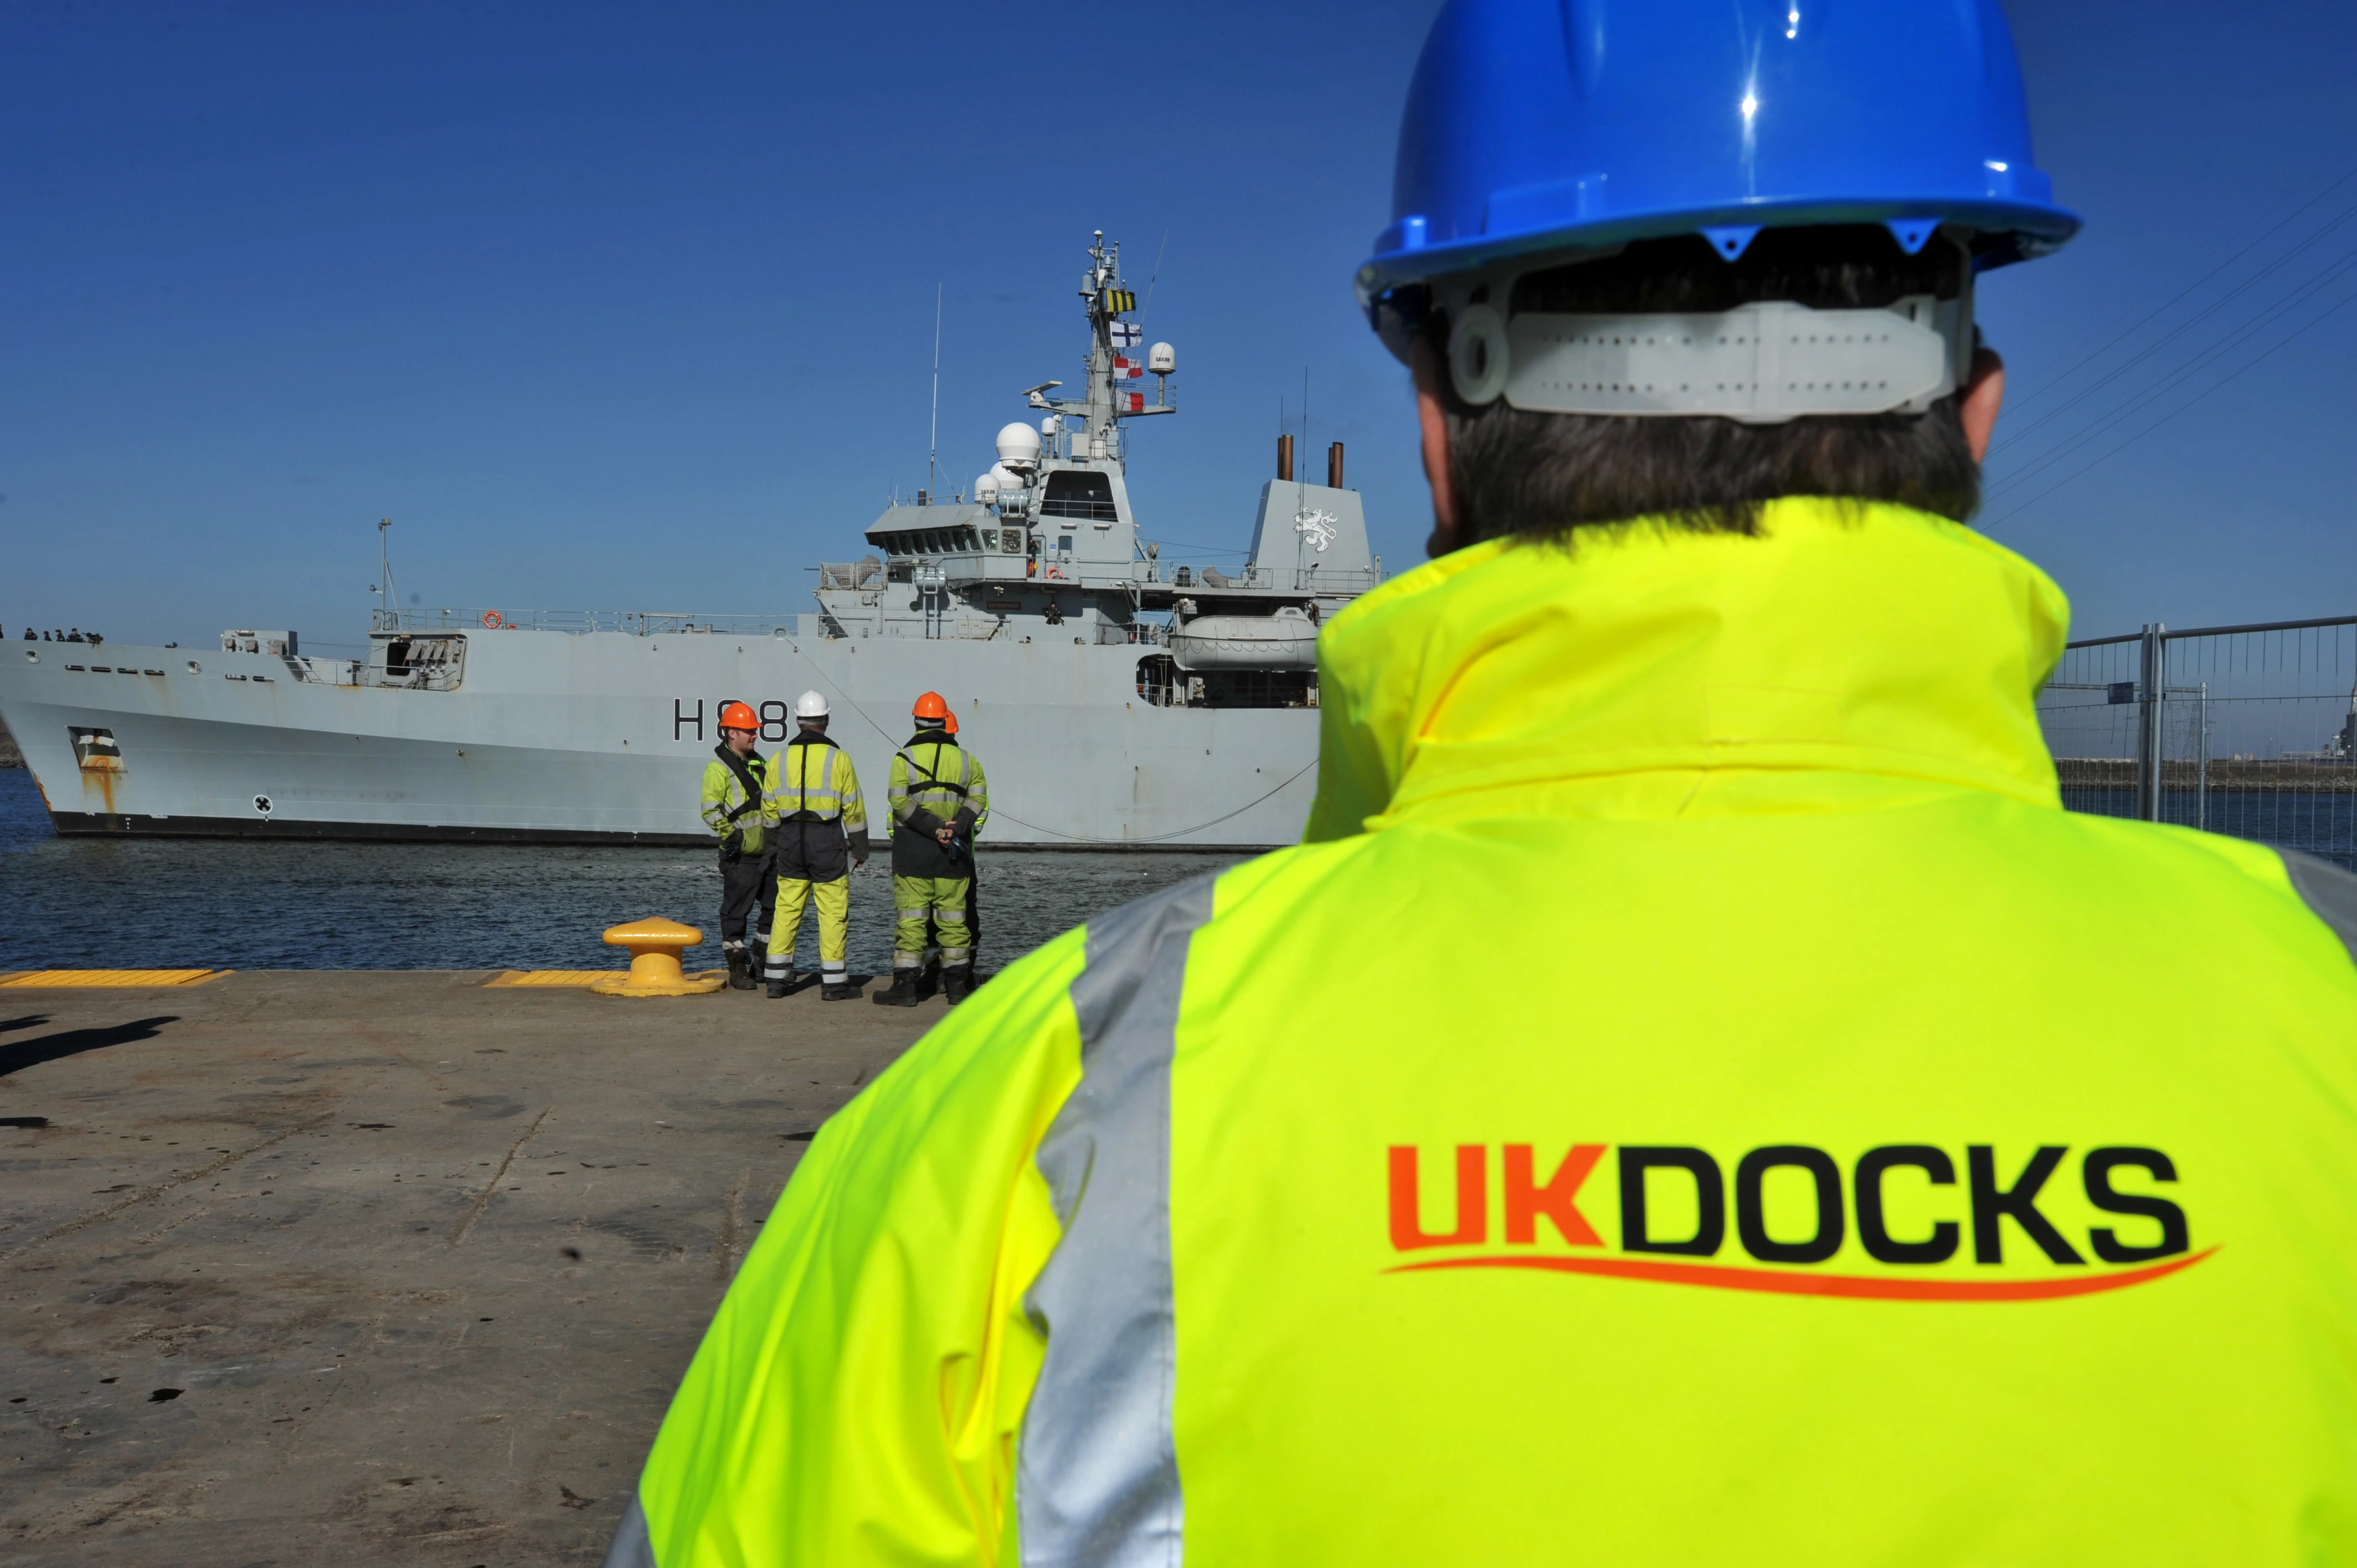 When the boat comes in - UK Docks wins £250m Royal Navy contract